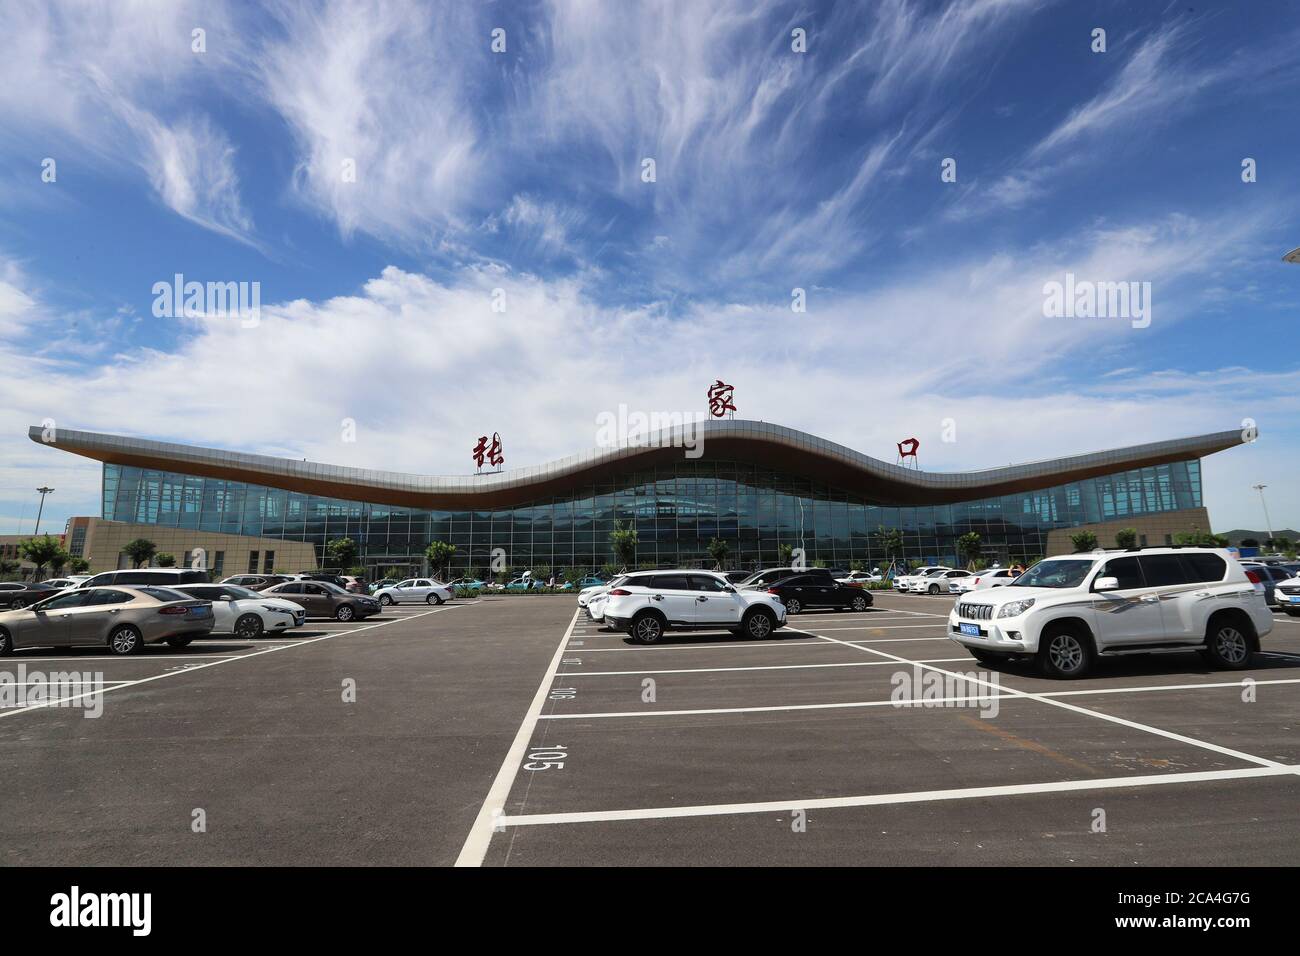 Zhangjiakou. 4th Aug, 2020. Photo taken on Aug. 4, 2020 shows Terminal 2 of the extended Zhangjiakou Ningyuan Airport in Zhangjiakou, north China's Hebei Province. The extended Zhangjiakou Ningyuan Airport, one of the key supporting infrastructure developments for the 2022 Beijing Winter Olympics, was completed and put into service on Monday. The expansion project includes a new terminal, an emergency rescue center, an apron, and an extended runway, among others. Credit: Wu Diansen/Xinhua/Alamy Live News Stock Photo